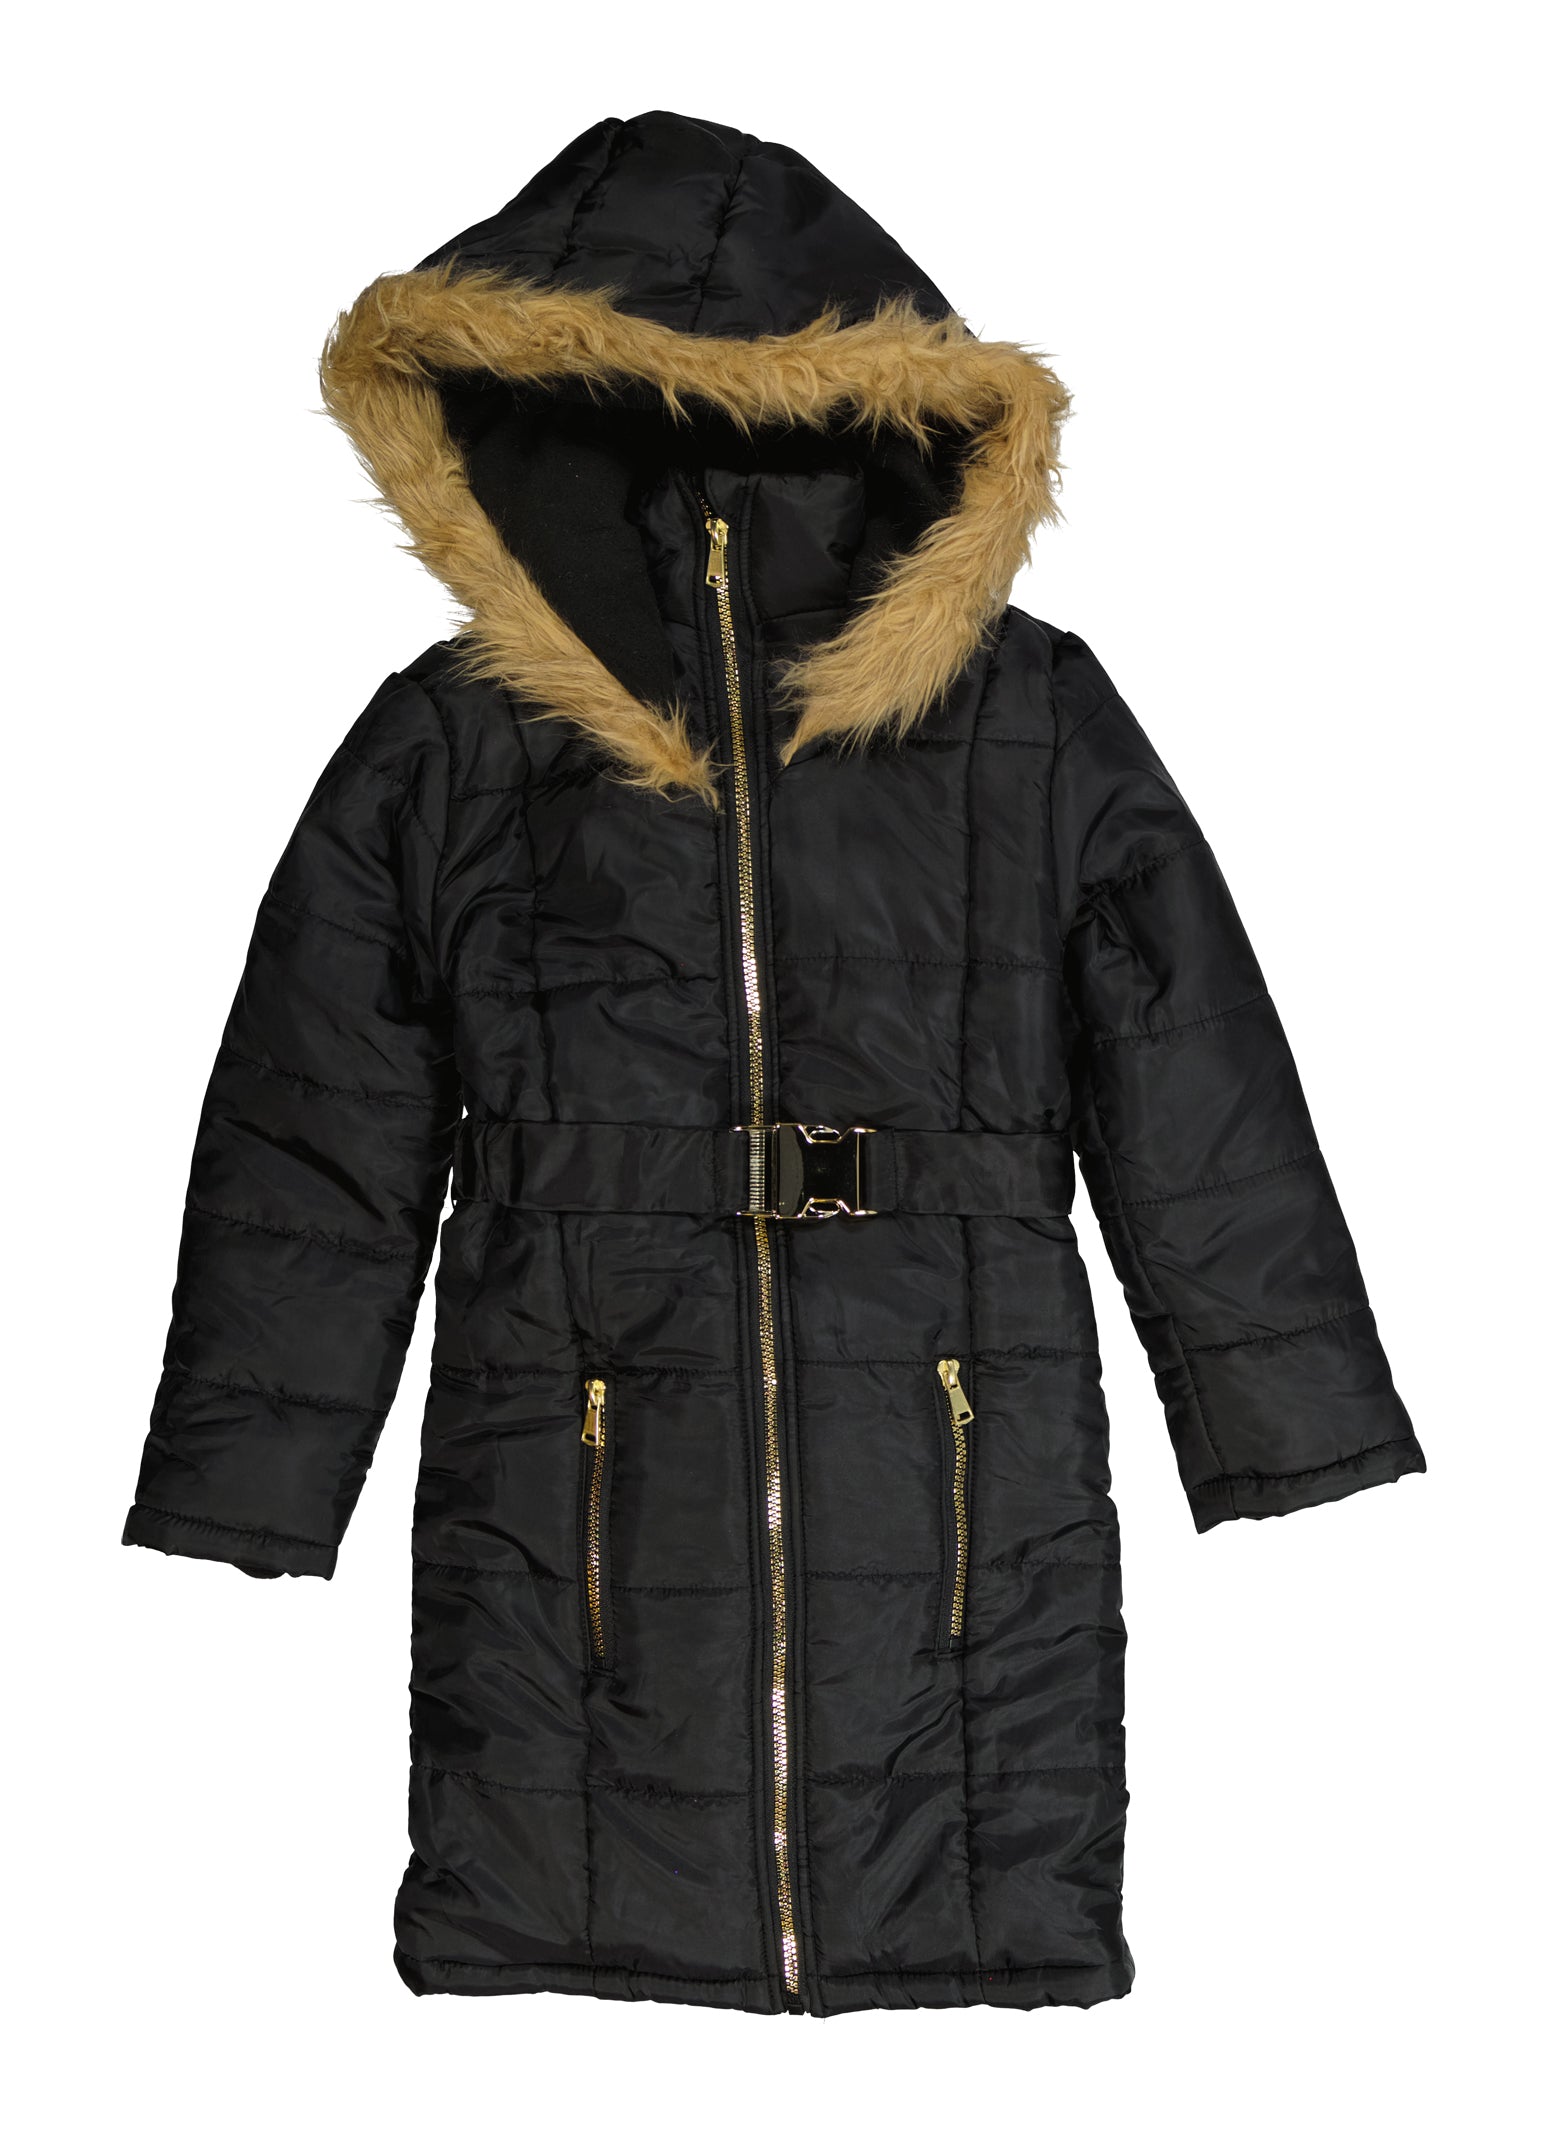 Girls Belted Zip Front Hooded Long Puffer Jacket